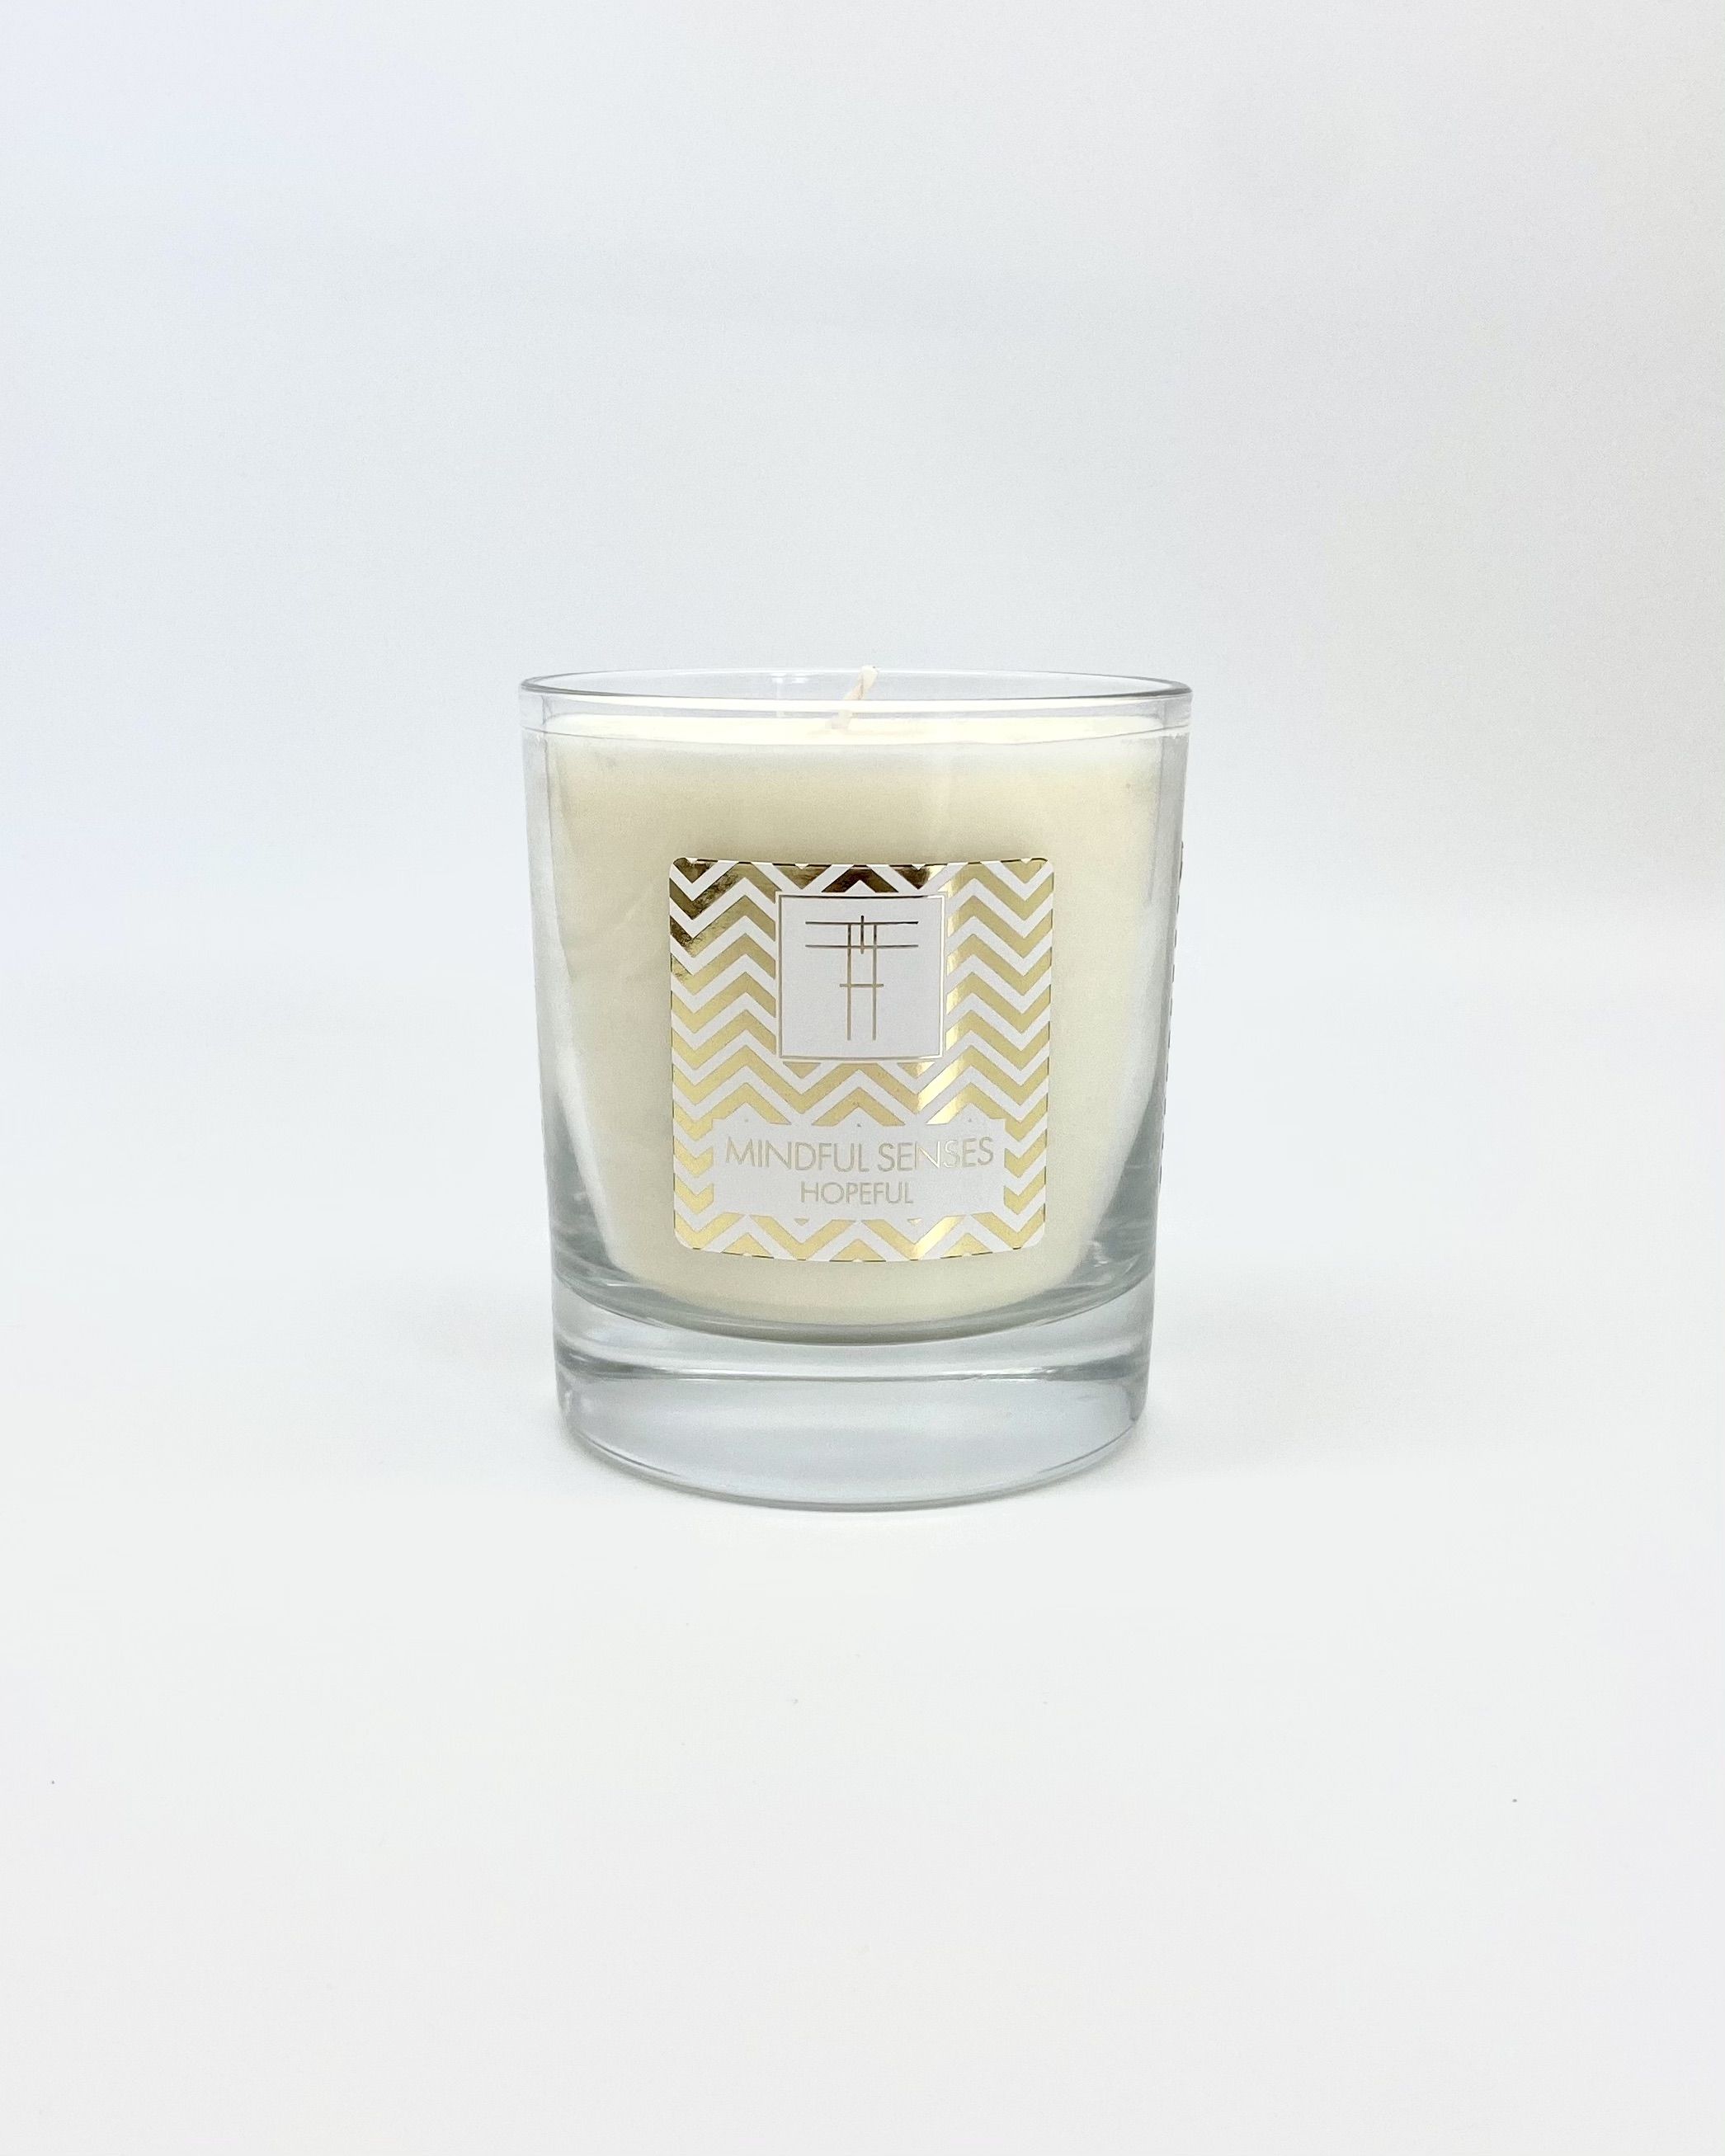 Created to create a calm and restorative enviroment, Mindful Senses Candles, are emotive triggers of colour, scent and mood. connect with your calmer, intuitiveinner self and discover a journey of reflective and balanced perspective. Made with geranium bergamot, orange, tea, and fruits, this fragrant candle envelopes your mind and soul in serenity and hopeful purpose.

100% Natural organic Soy wax.

100% British designed, crafted and manufactured.

Size 300cl 45+ Hour burn.